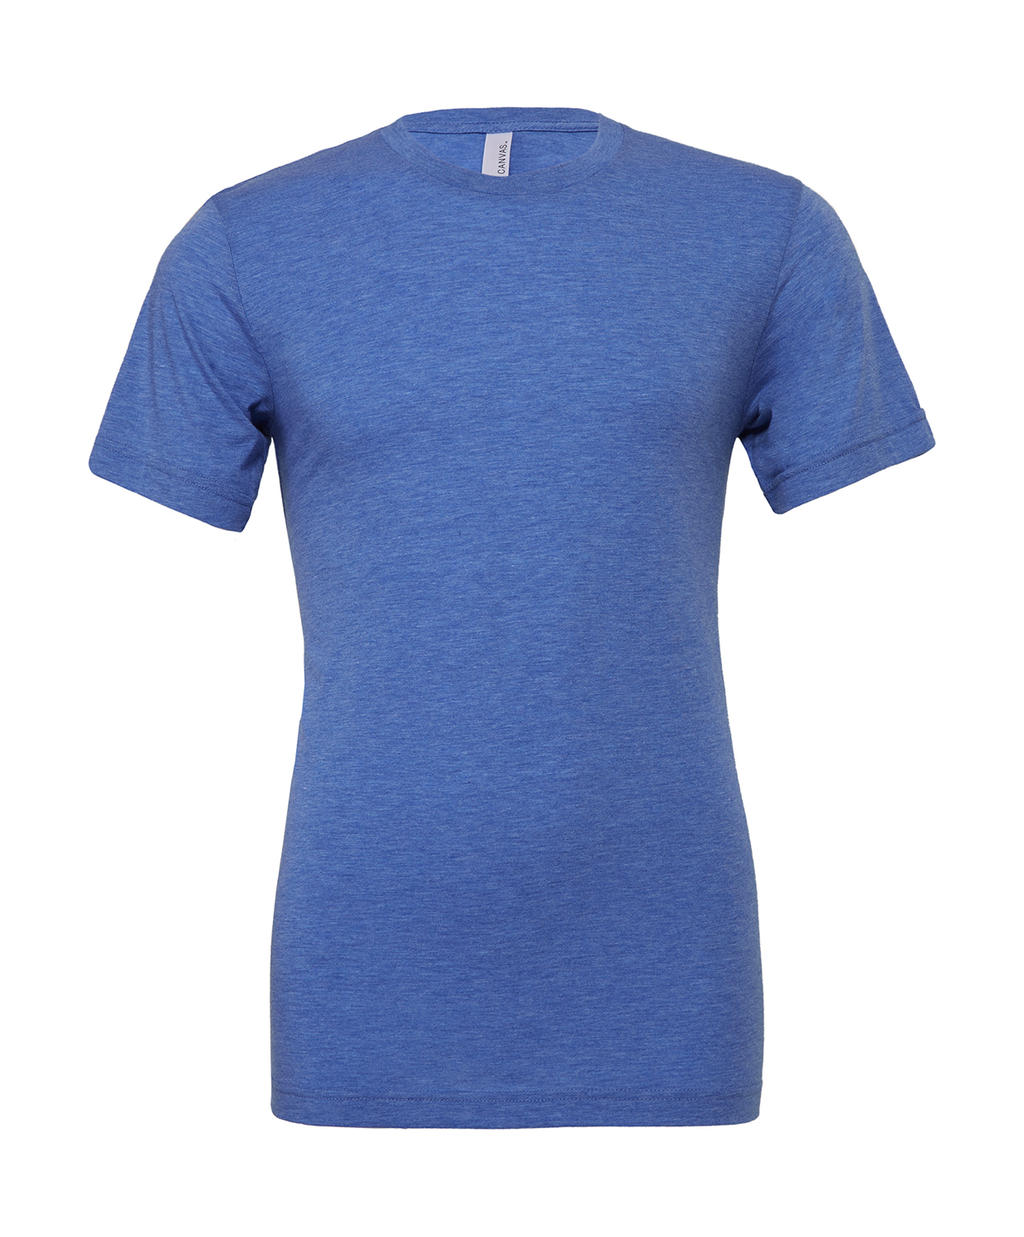  Unisex Triblend Short Sleeve Tee in Farbe True Royal Triblend